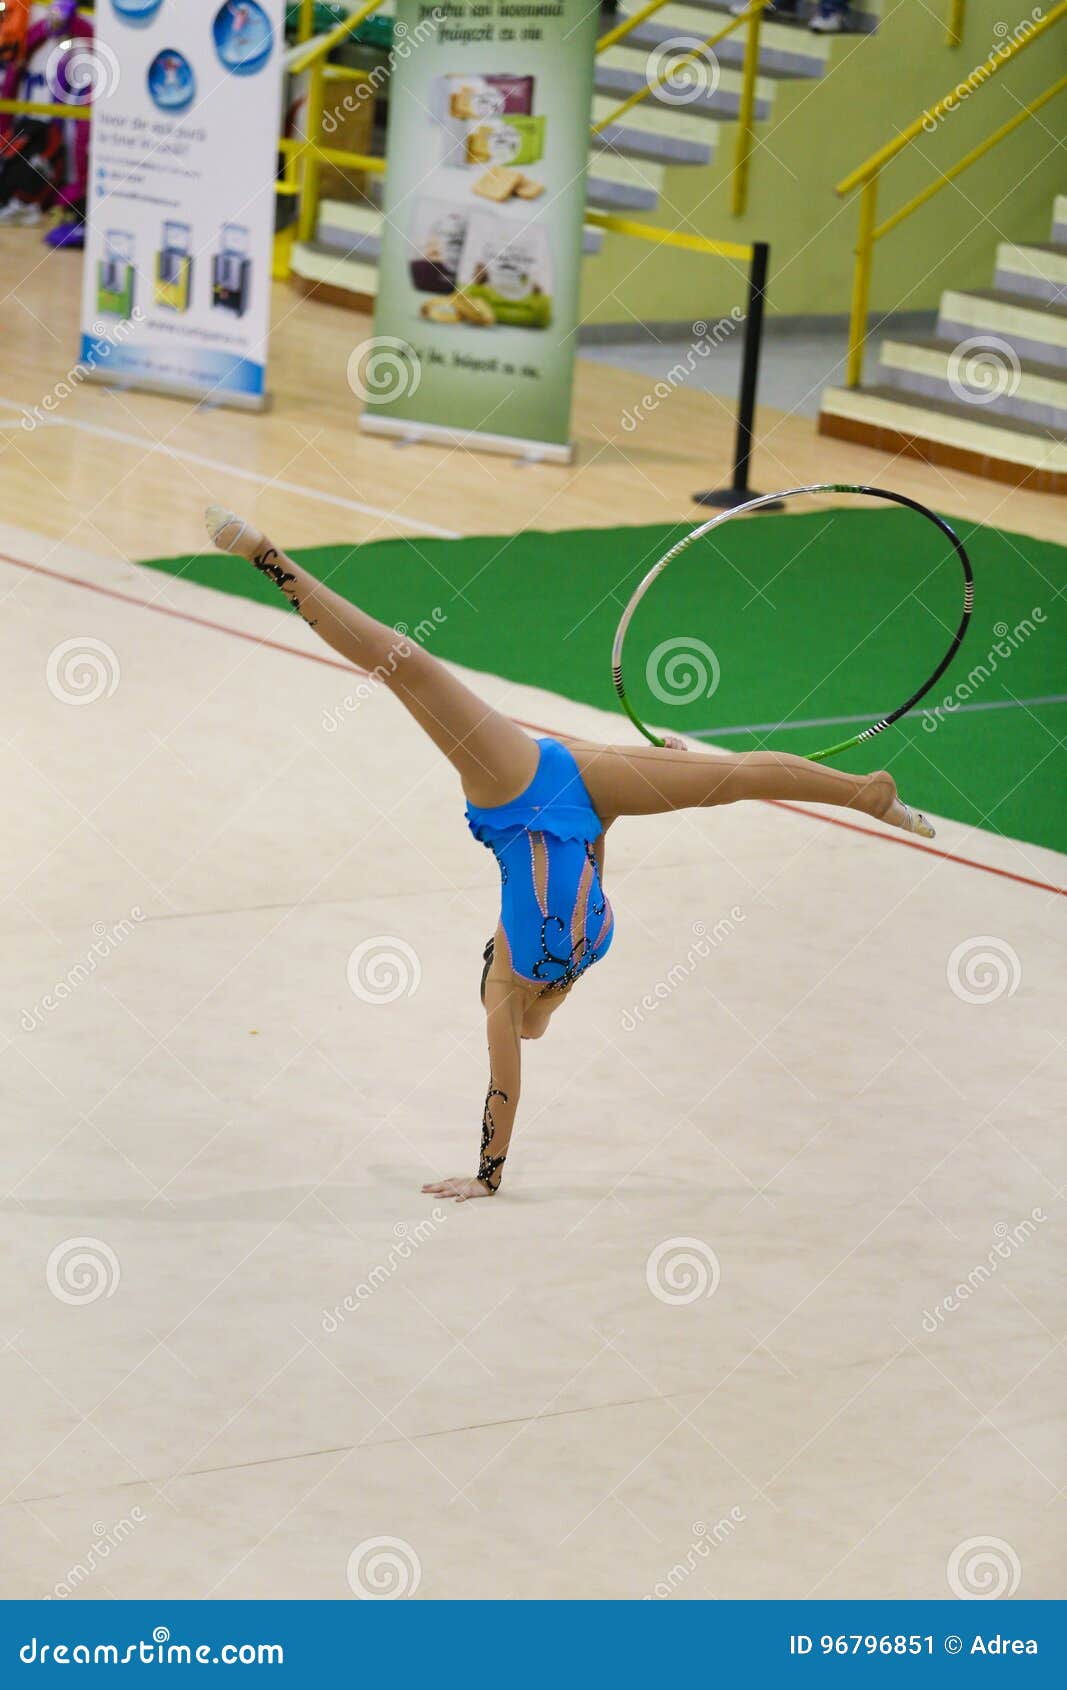 Athlete Performing Her Hoop Routine Editorial Photo Image Of Dance Pose 96796851 